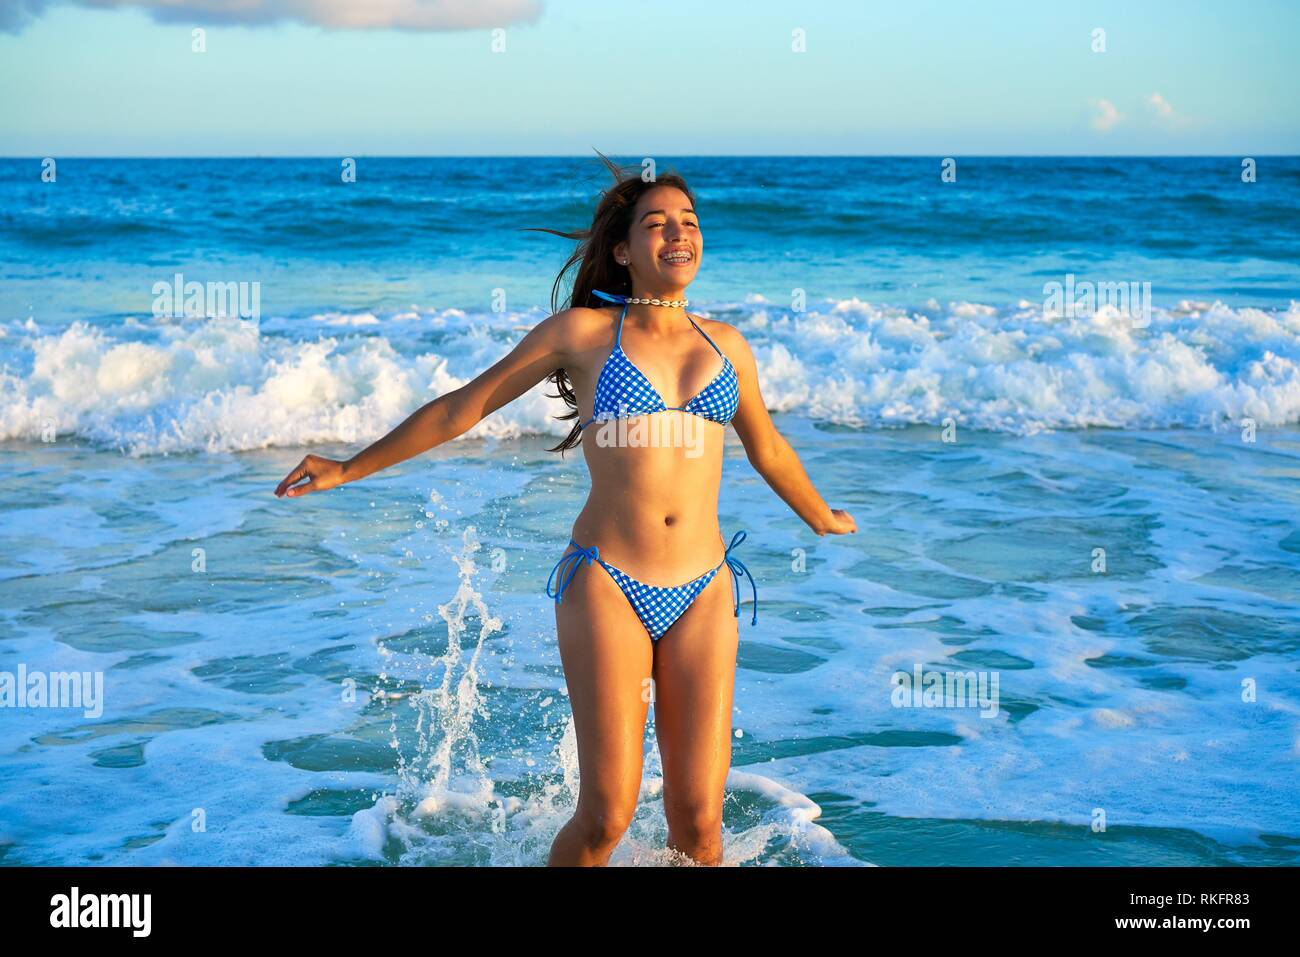 Page 2 - Cancun Mexico Bikini High Resolution Stock Photography and Images  - Alamy